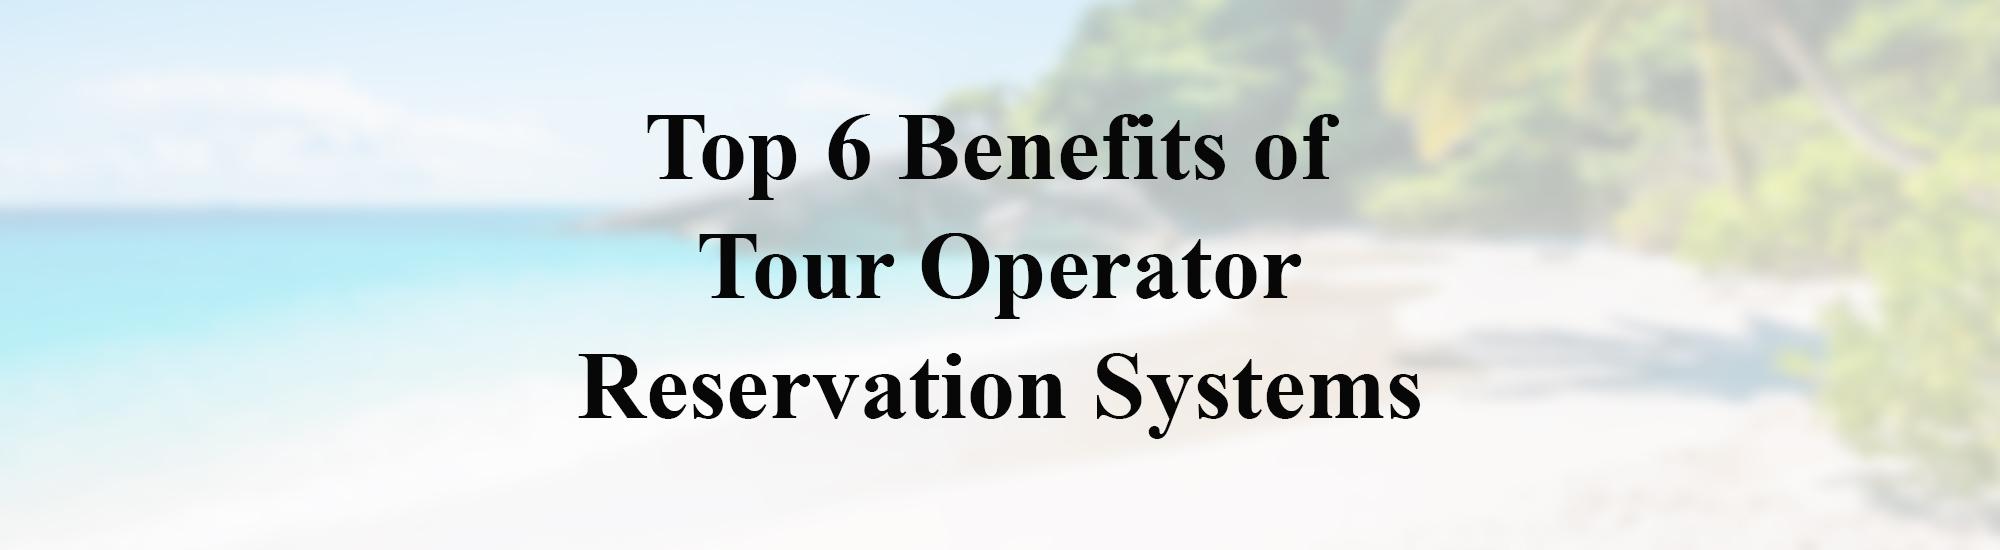 Top 6 Benefits of Tour Operator Reservation Systems